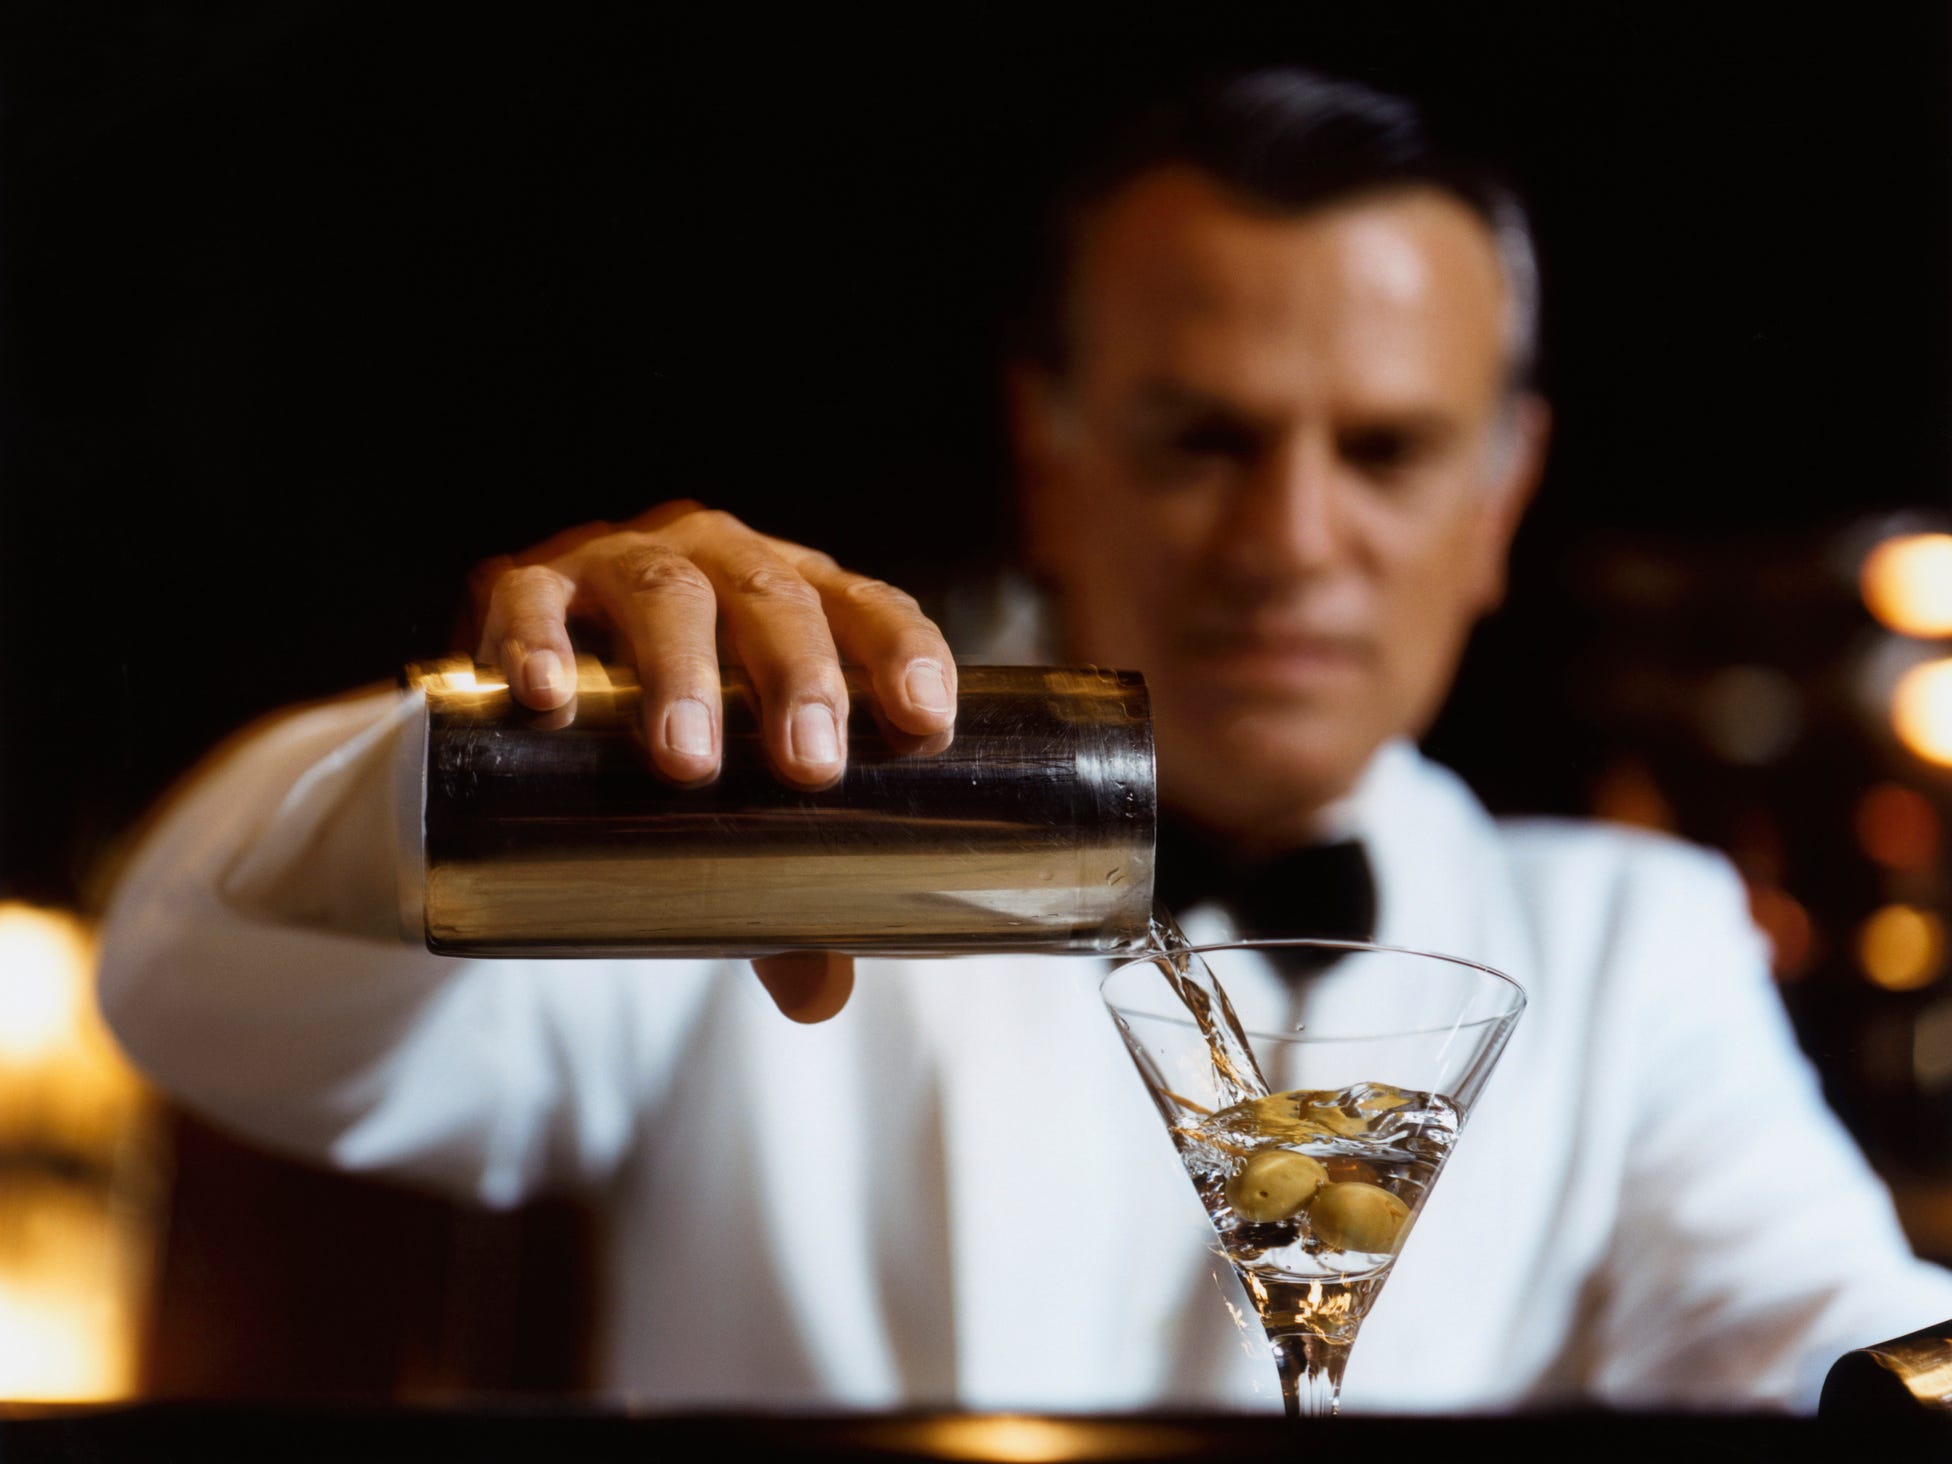 A bartender pouring a martini into a glass with an olive at the bottom.